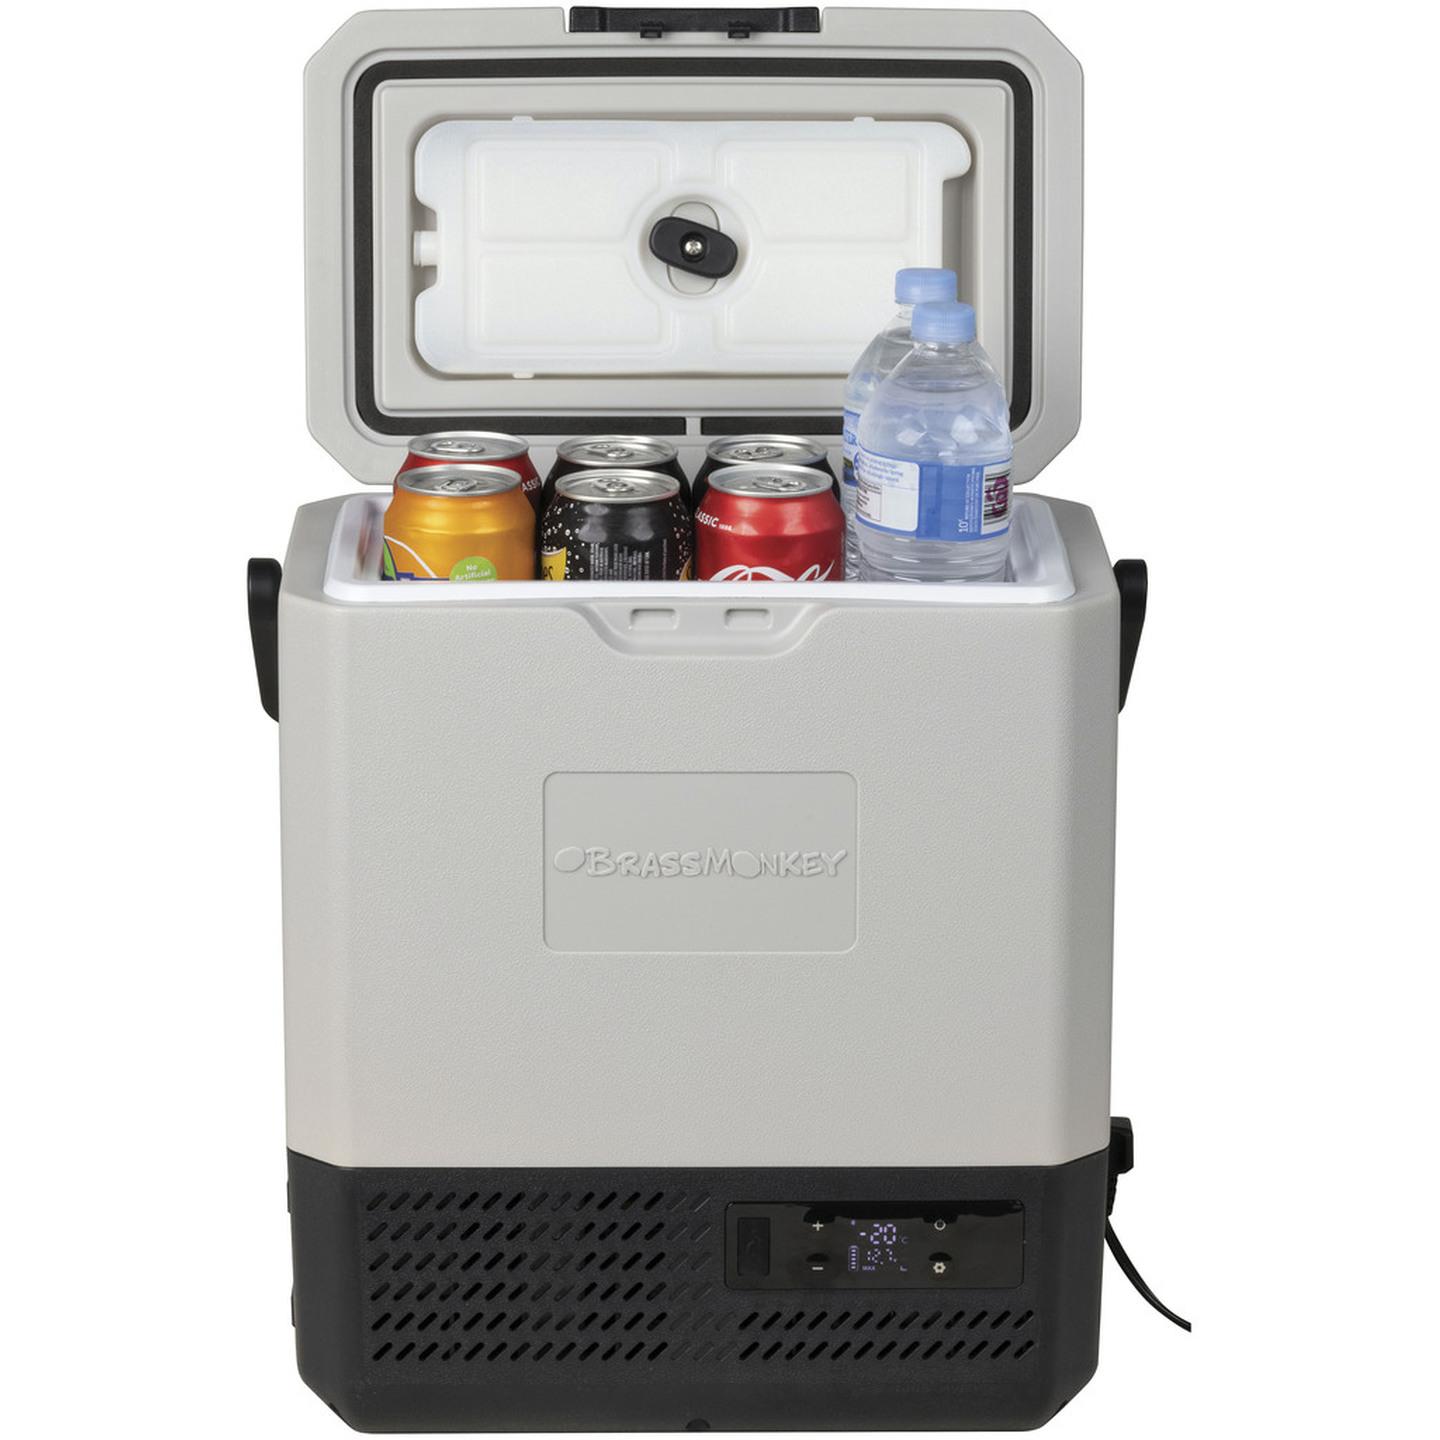 8L Brass Monkey Portable Fridge/Freezer with Carry Handle and Battery Compartment